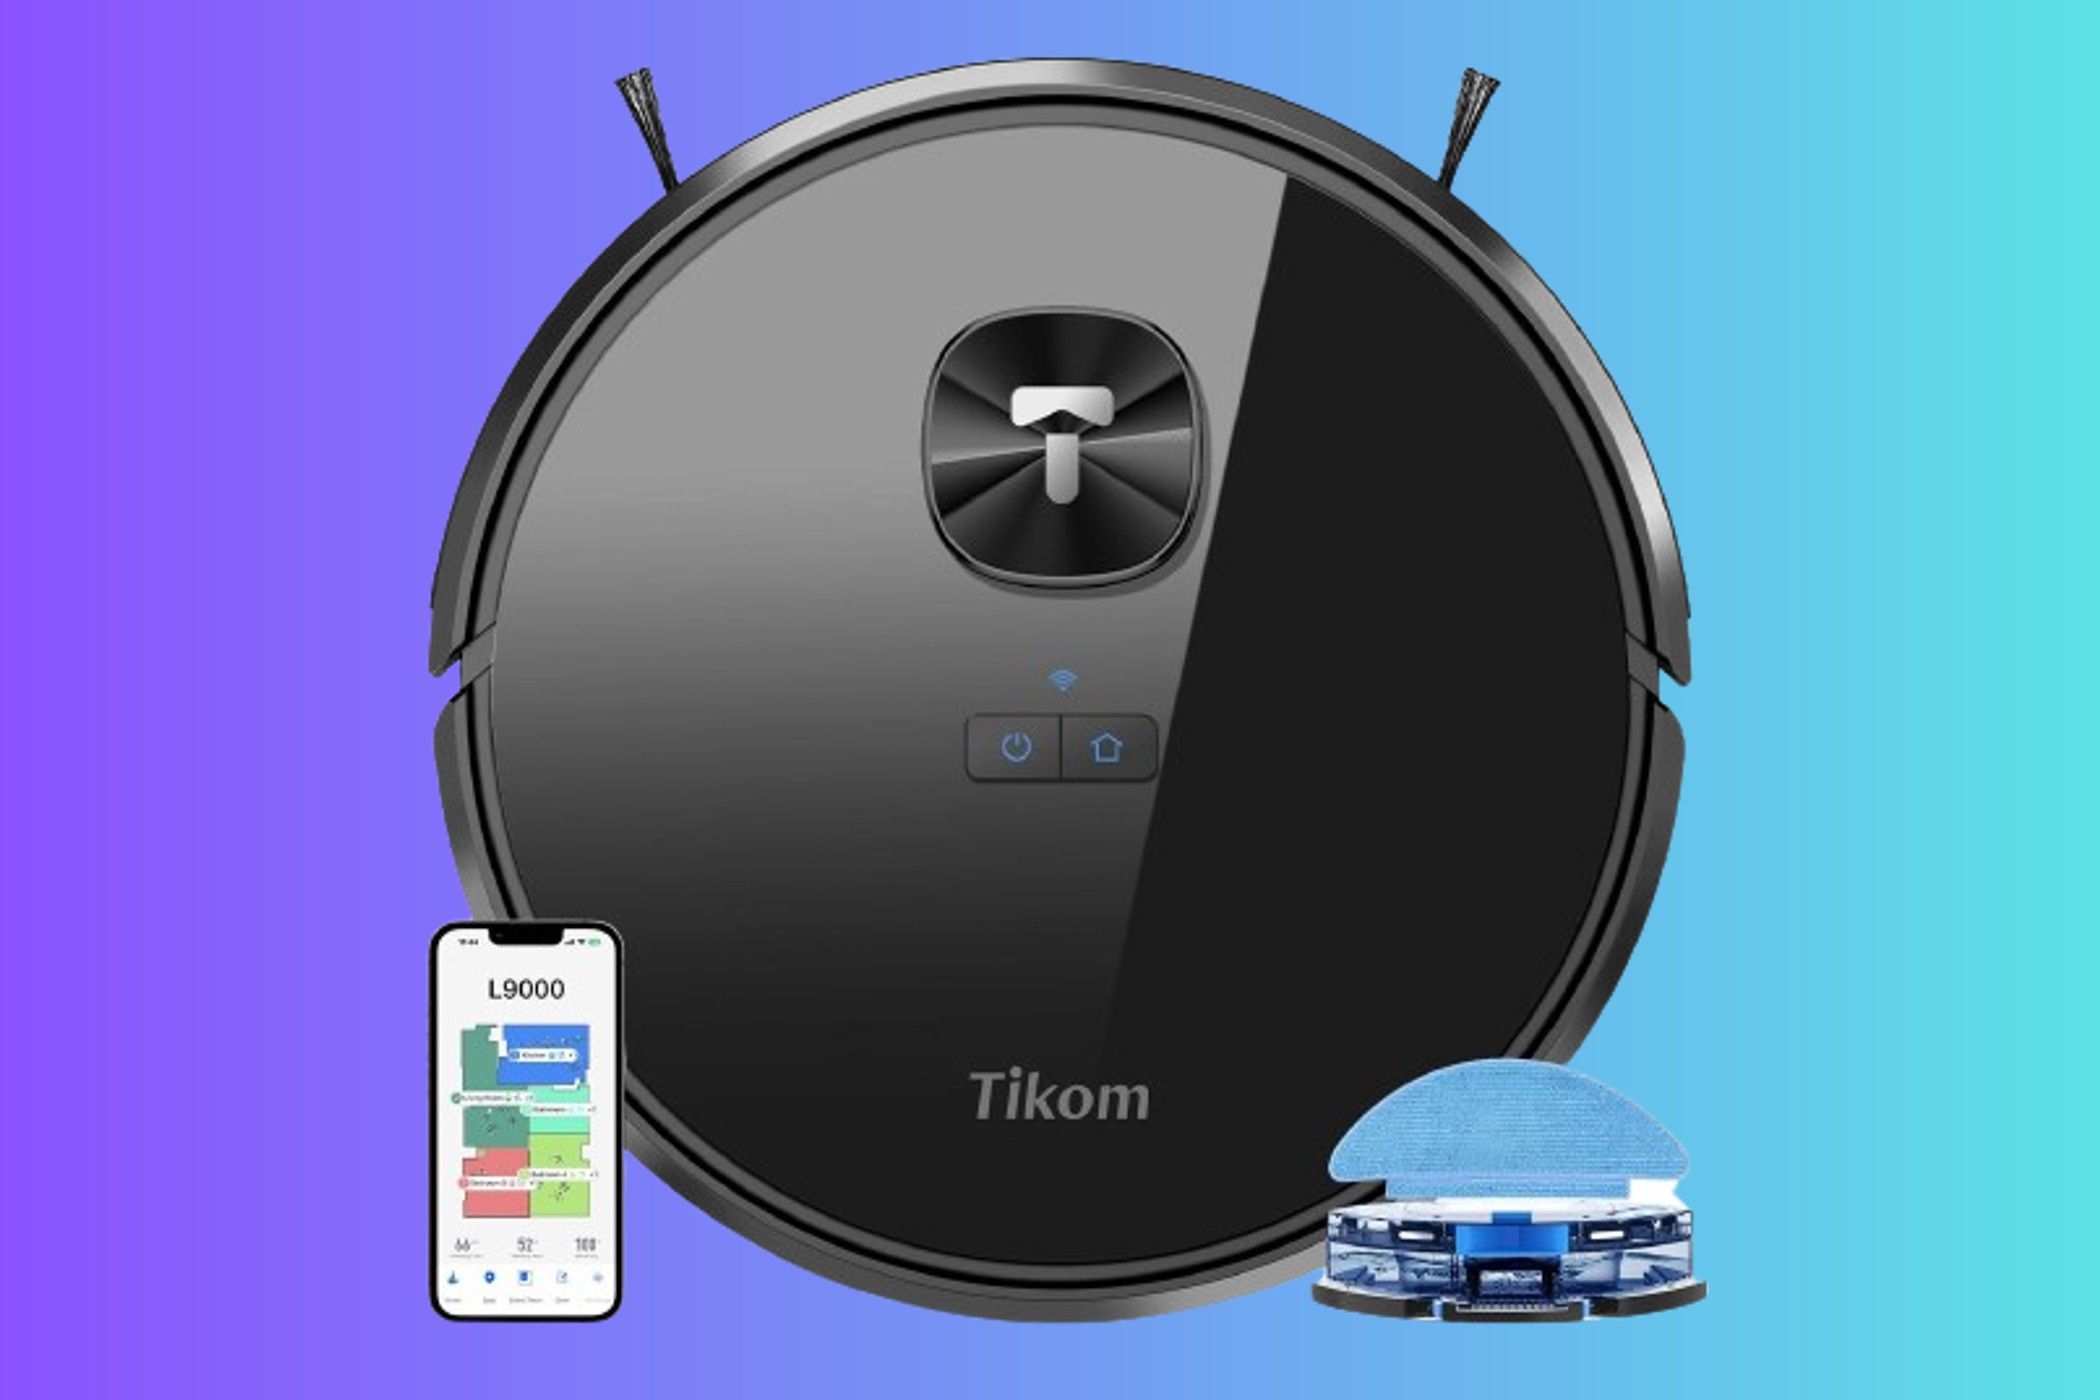 Tikom L9000 Vacuum and Mop Combo on a gradient background